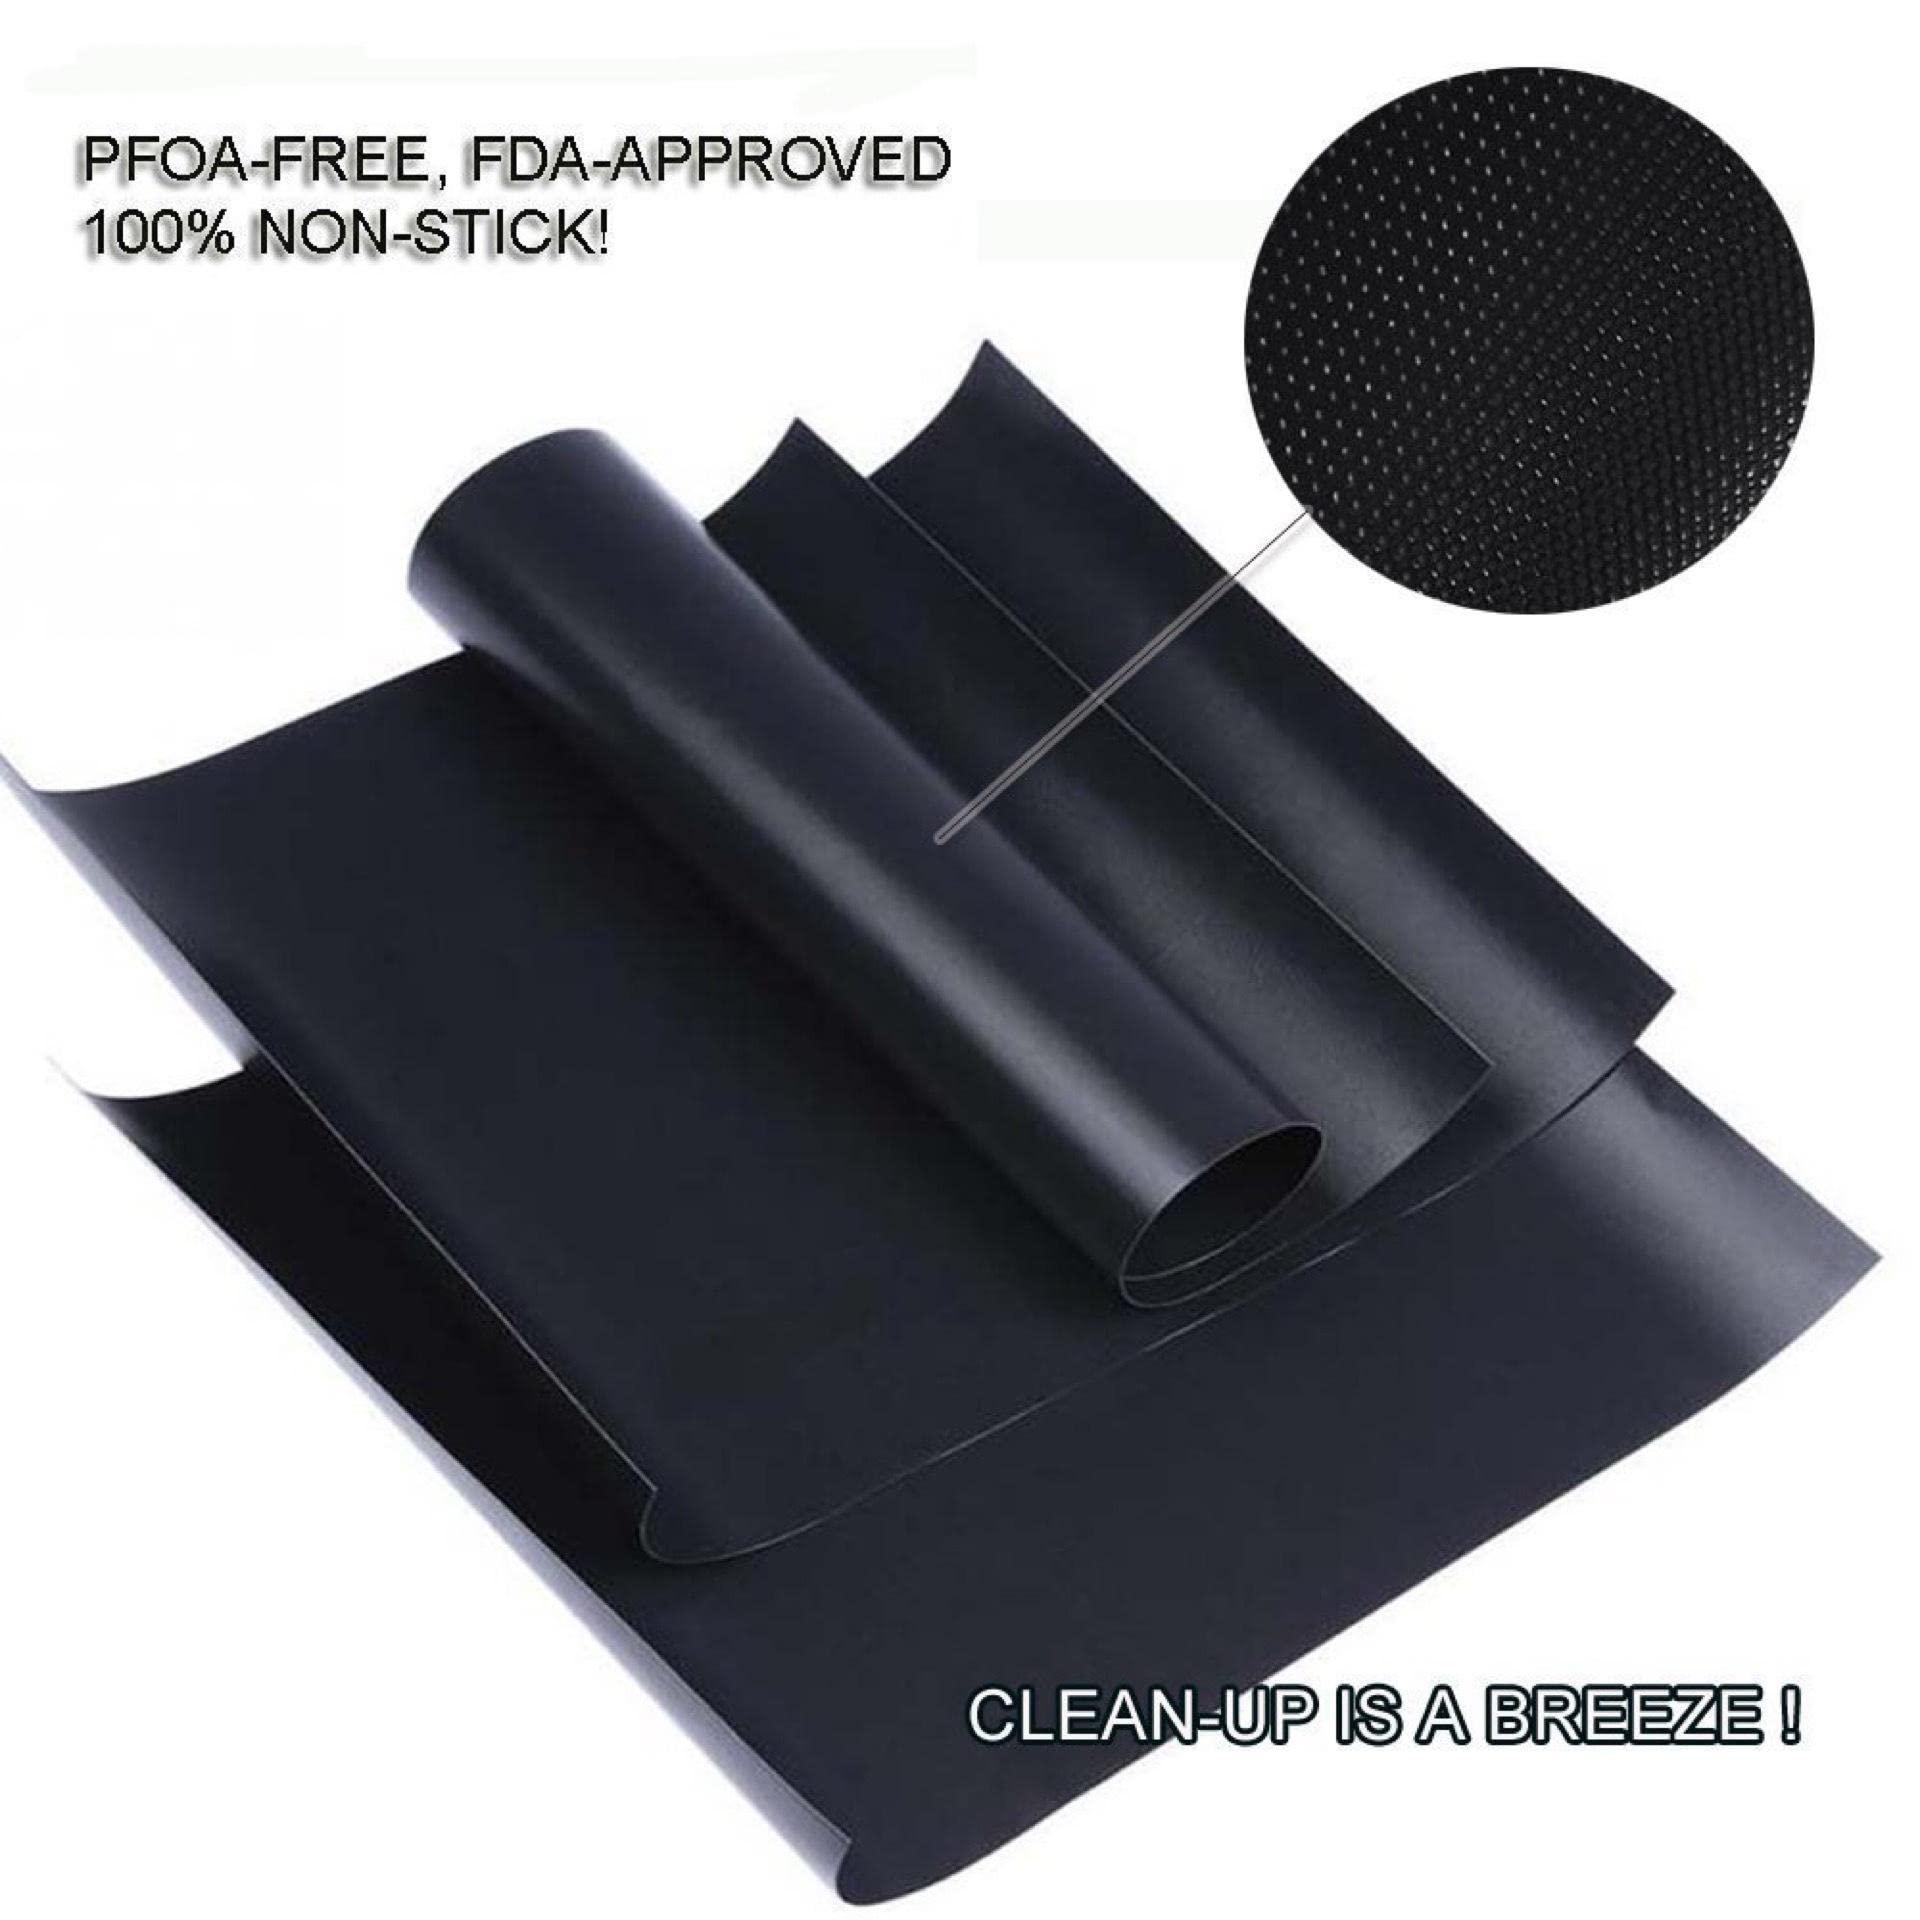 RENOOK Grill Mat Set of 6 - 100% Non-Stick Reusable Mats for Gas, Charcoal or Electric Grills - Easy to Clean - 15.75 x 13-Inch, Black - CookCave